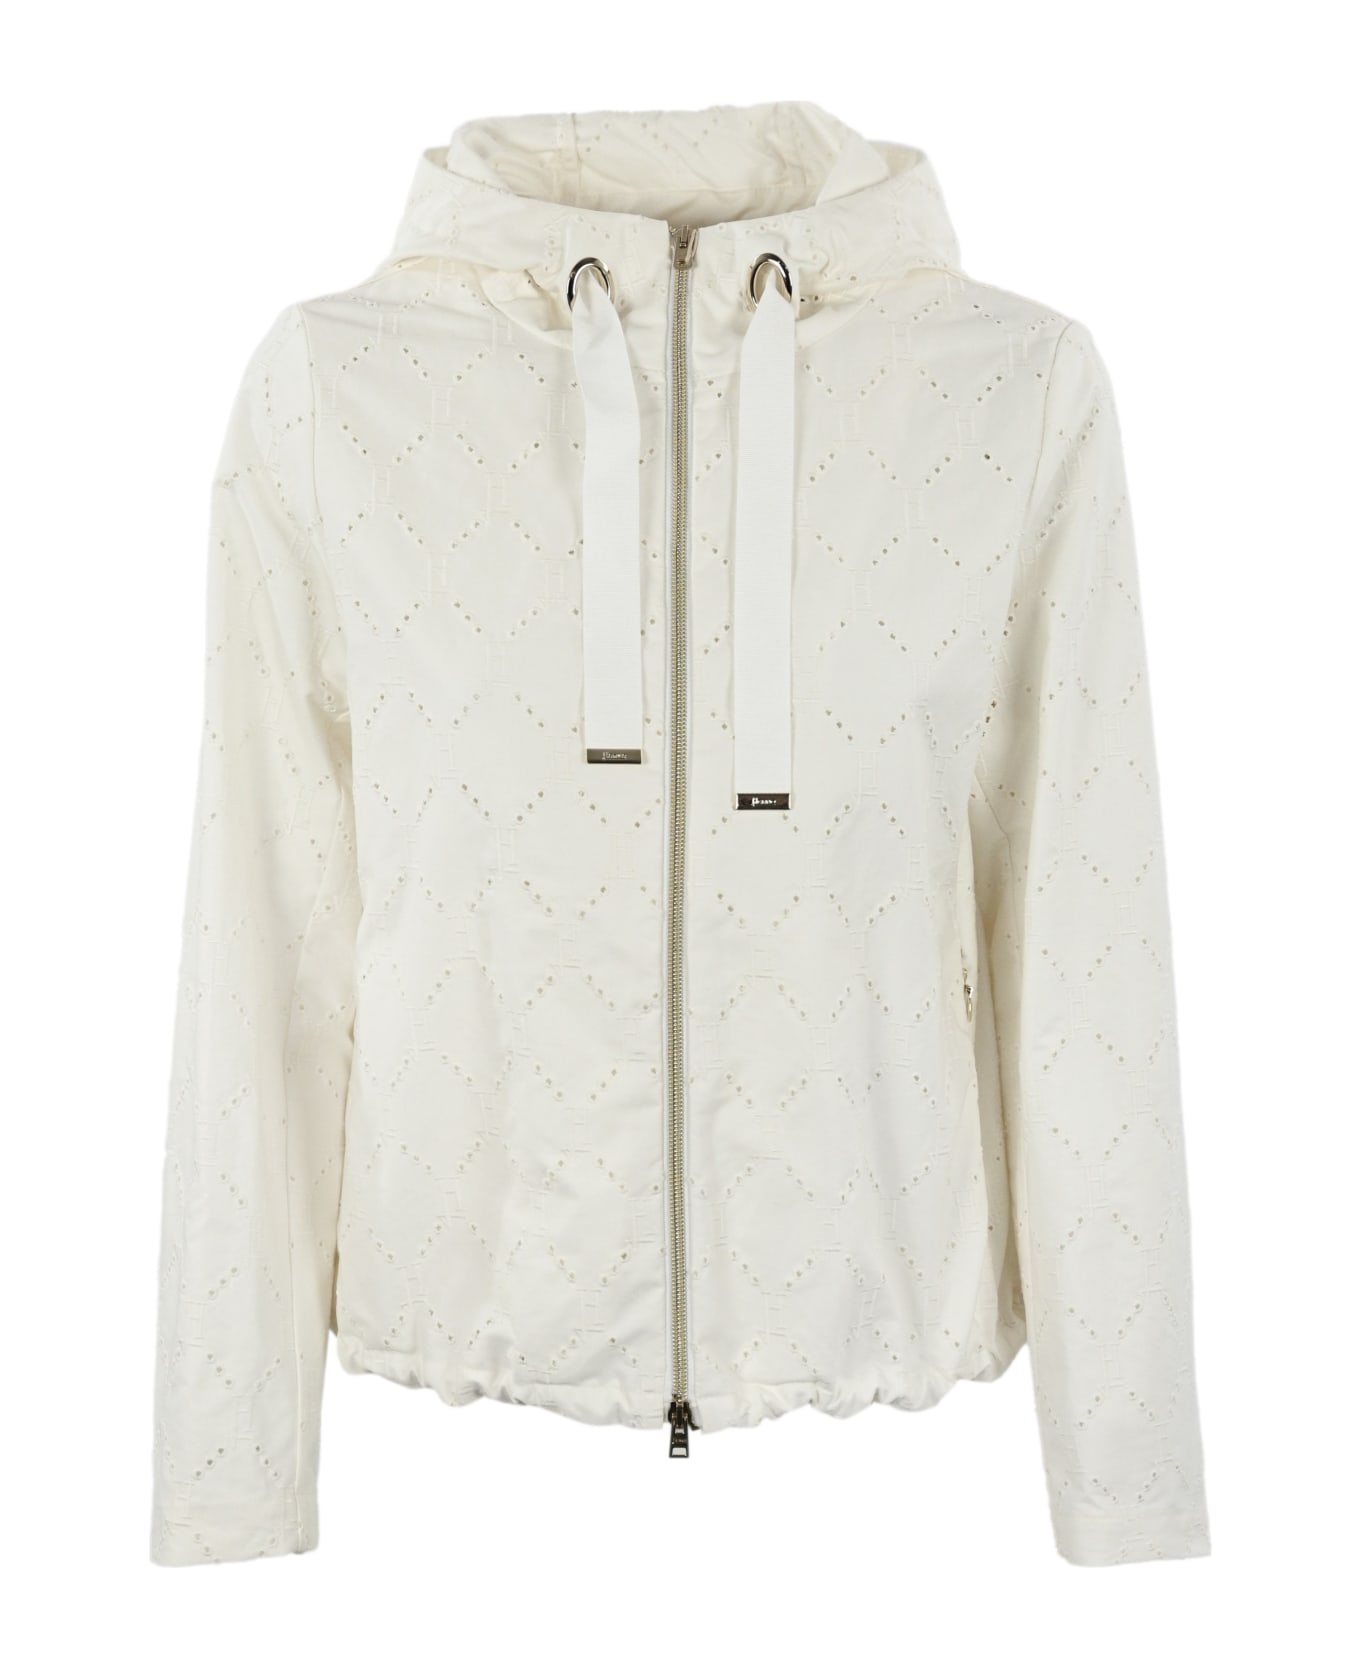 Herno Perforated Jacket With Hood - White